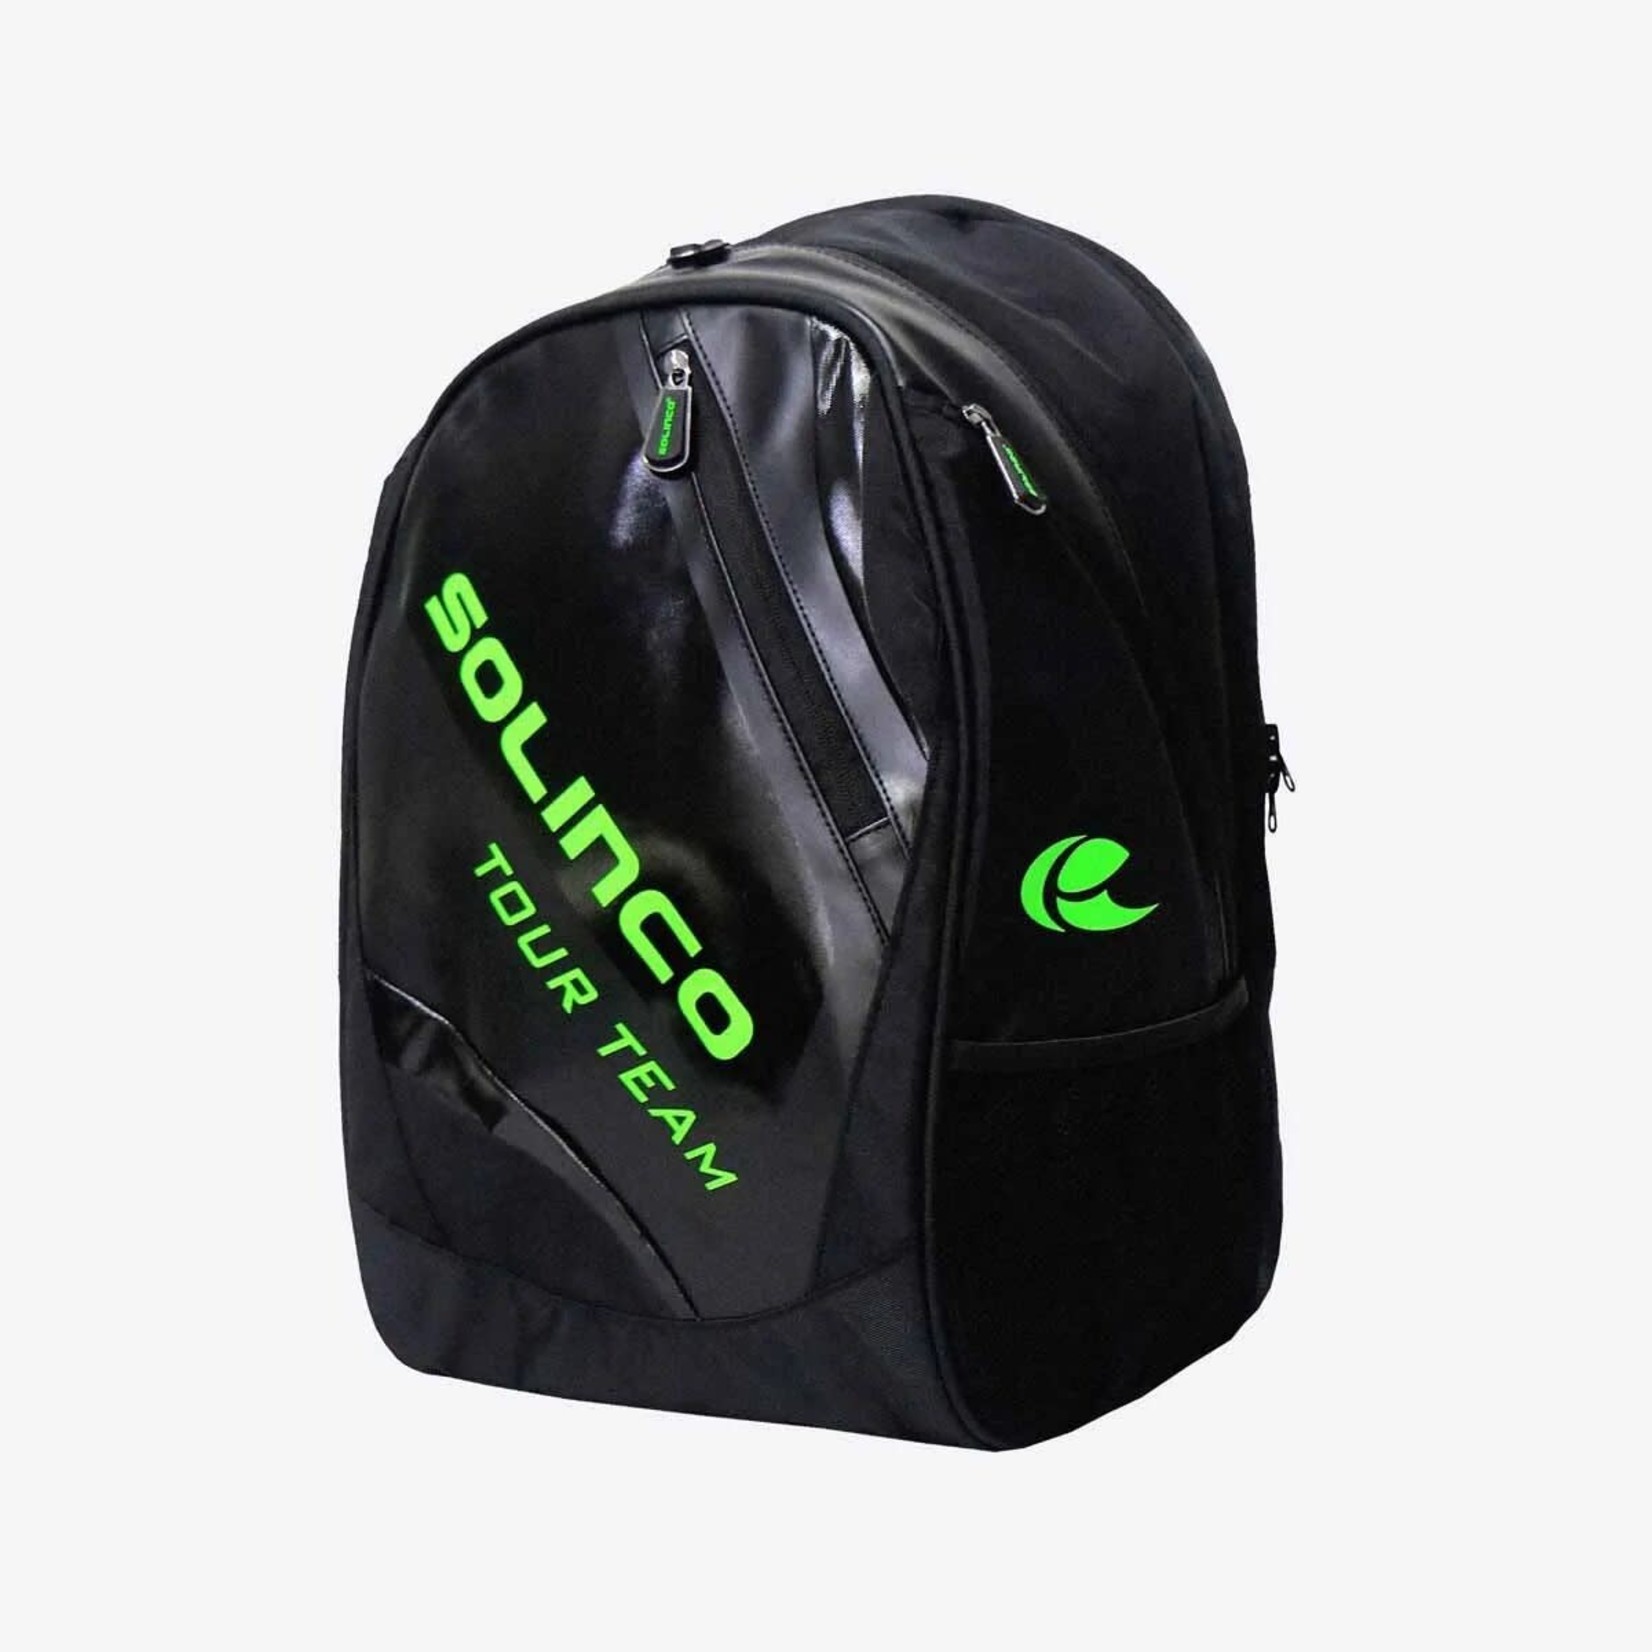 Solinco Tour Backpack B/W w/ Green Lining Zipper